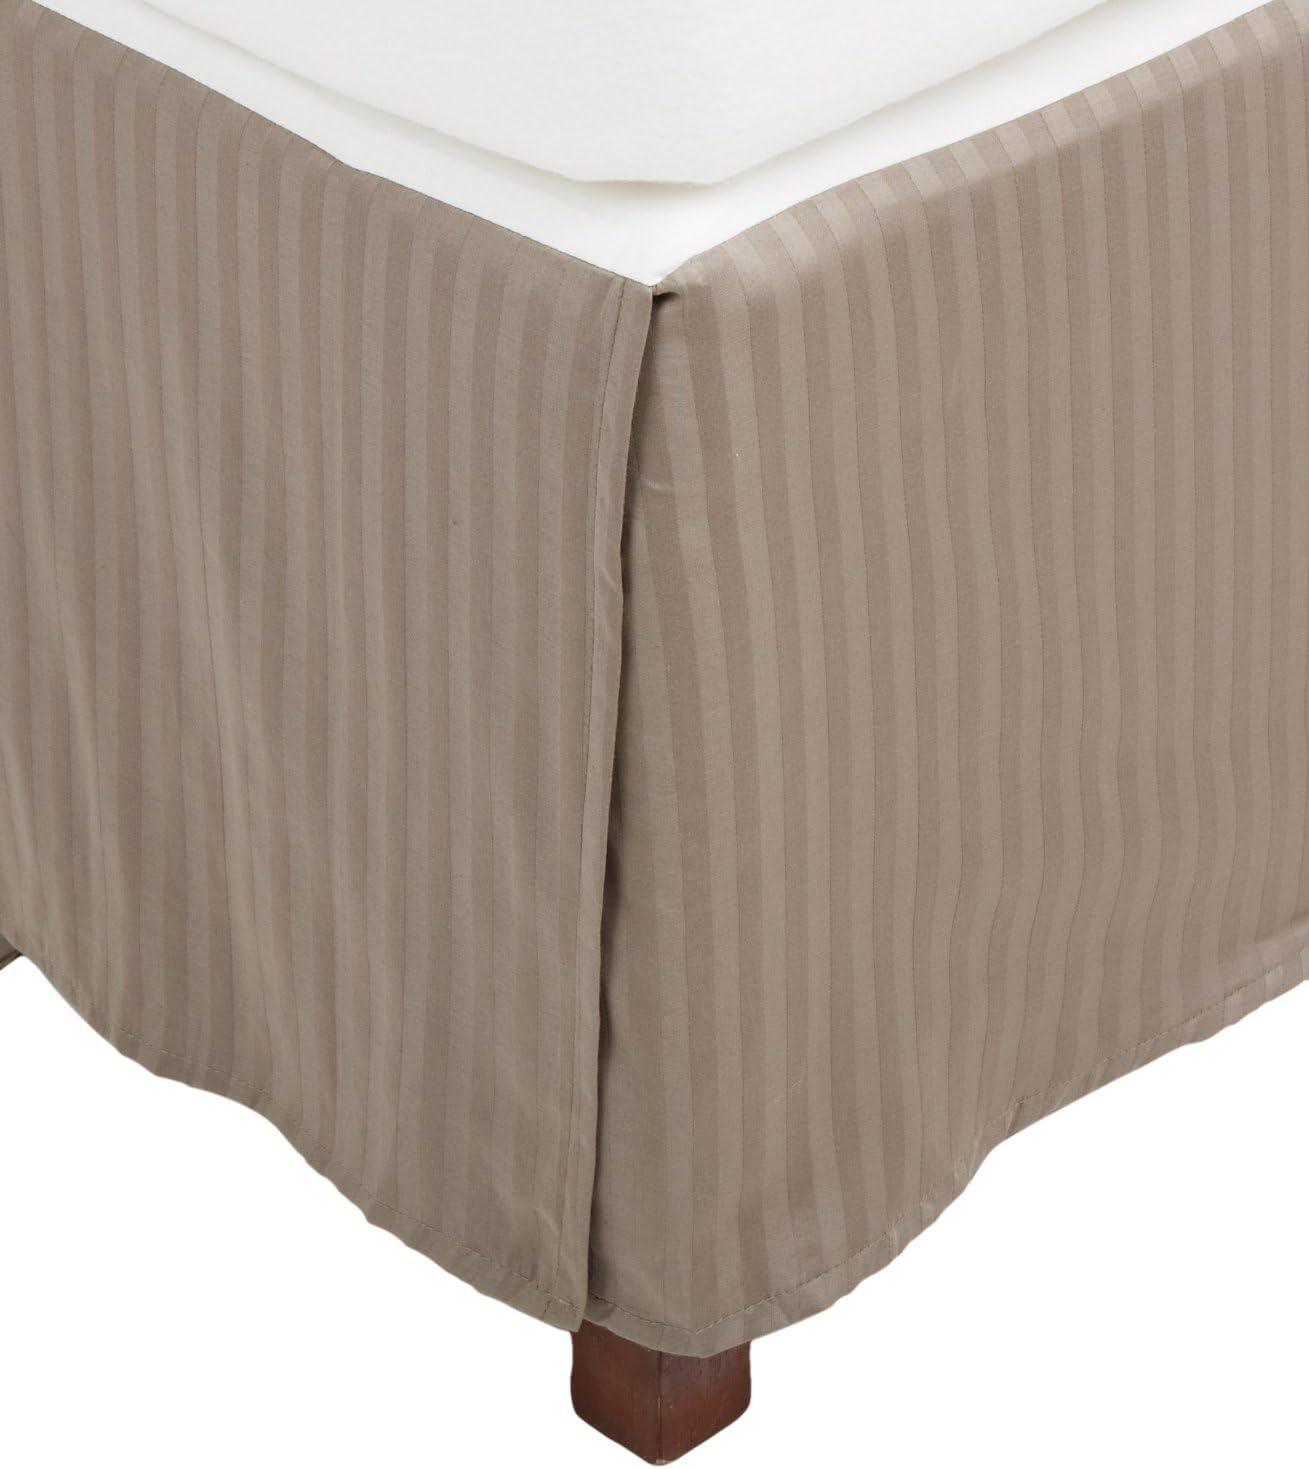 300 Thread Count Egyptian Cotton 15" Drop Striped Bed Skirt - by Superior - Superior 